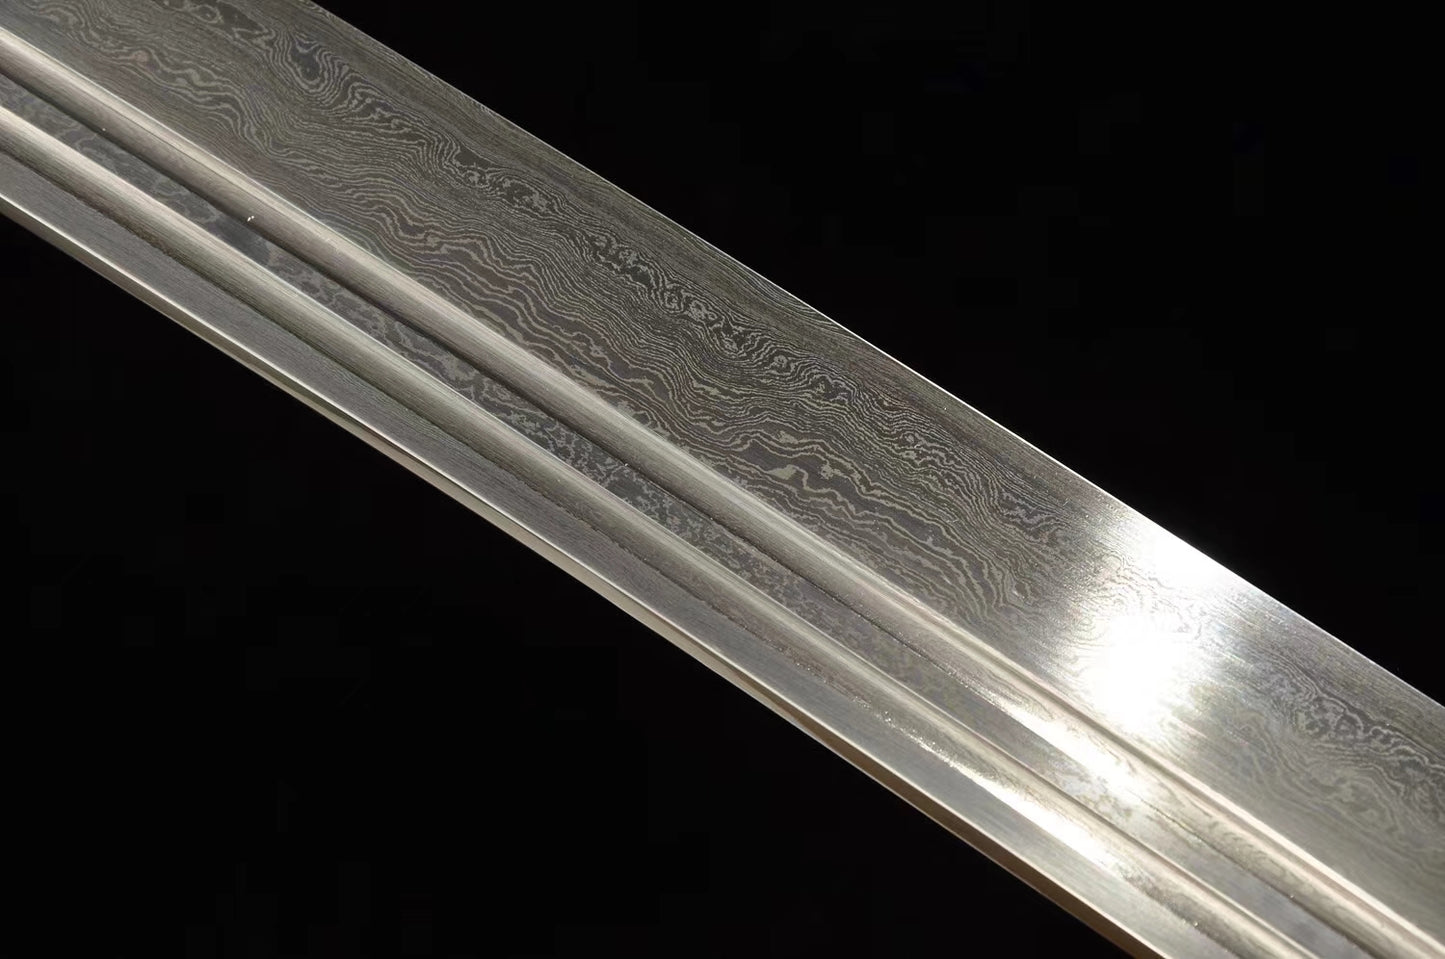 Astro Knife,Sabre,Hand Forged,Damascus Steel Blade,Brass,Redwood - Chinese sword shop